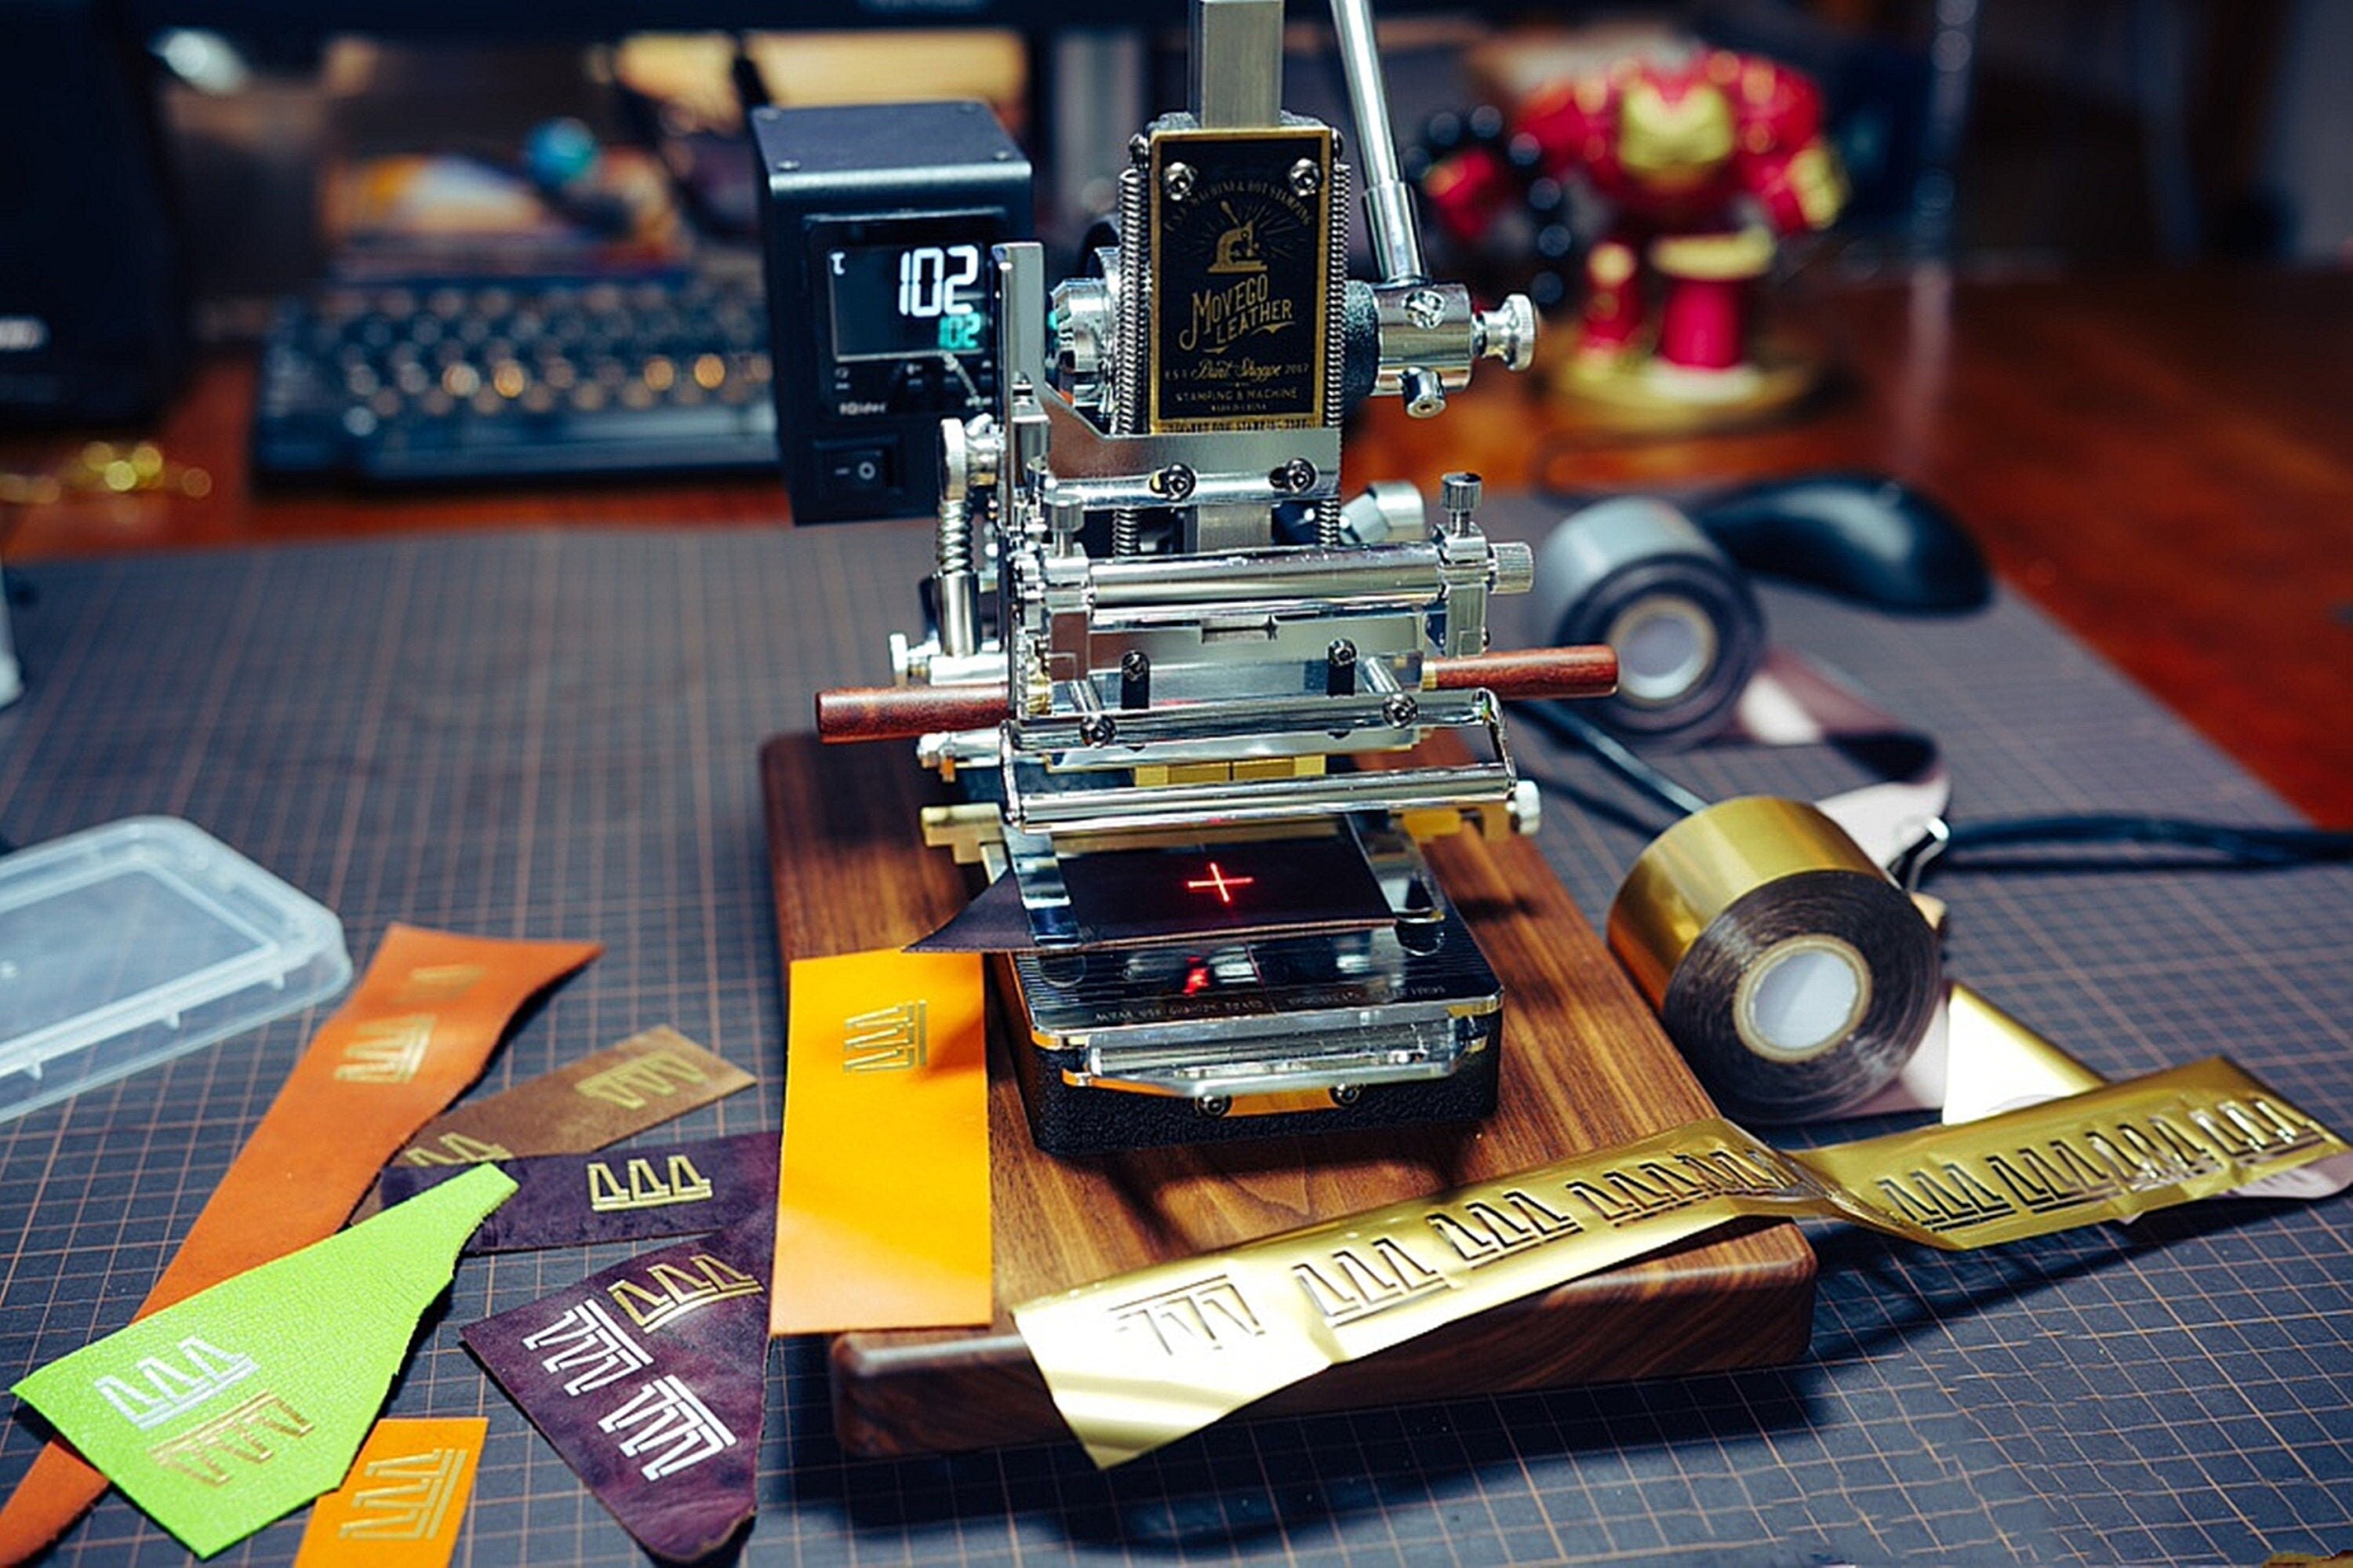 Express Shipping - Vintage style - Laser Locator - Hand operated Hot Foil Leather Stamping Machine